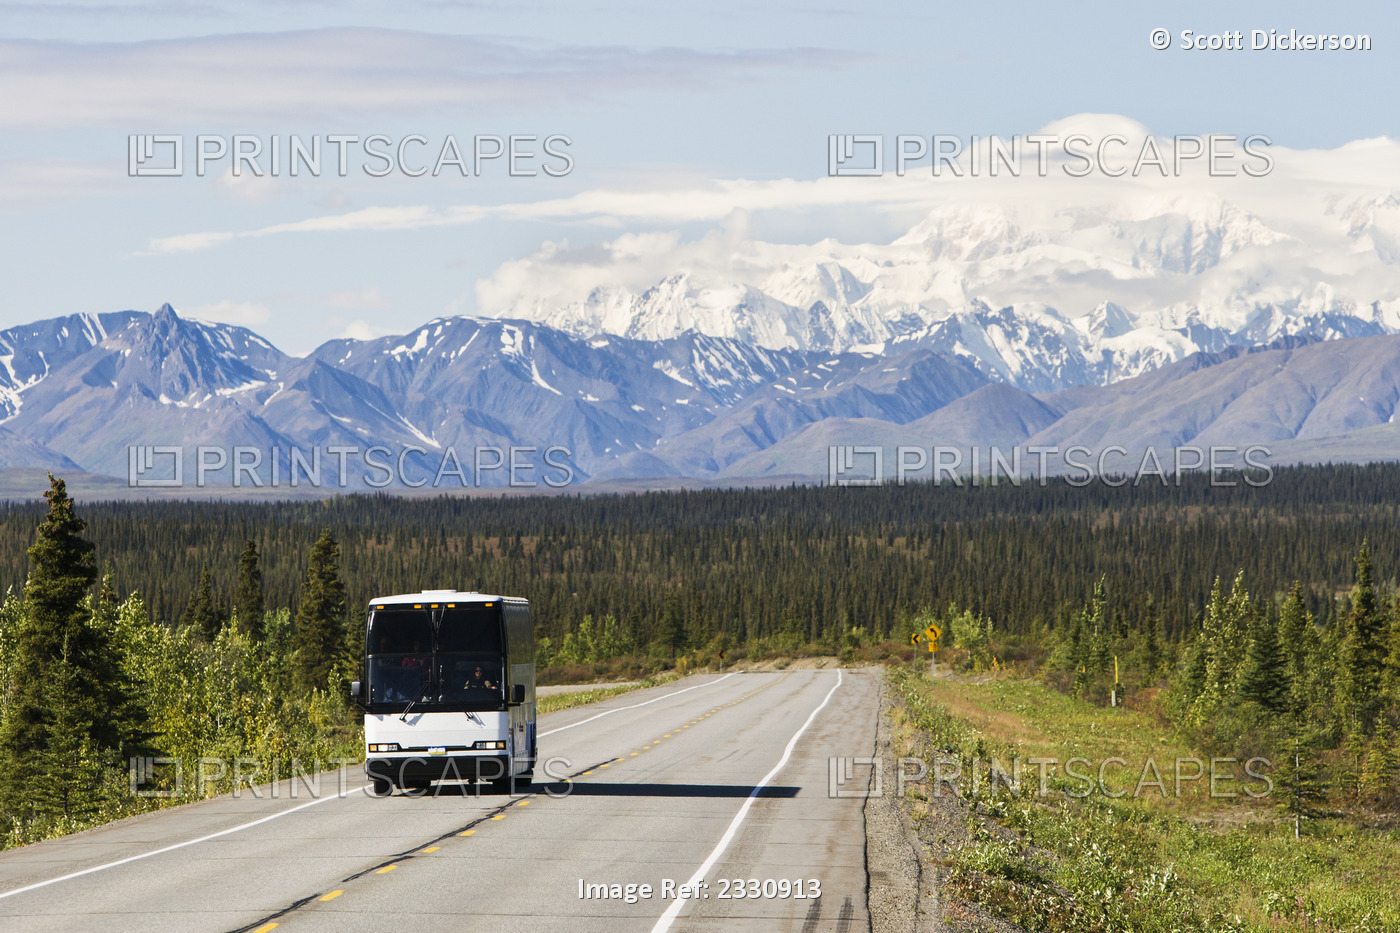 Tour Bus On George Parks Highway With Mt. Mckinley In Background, Interior ...